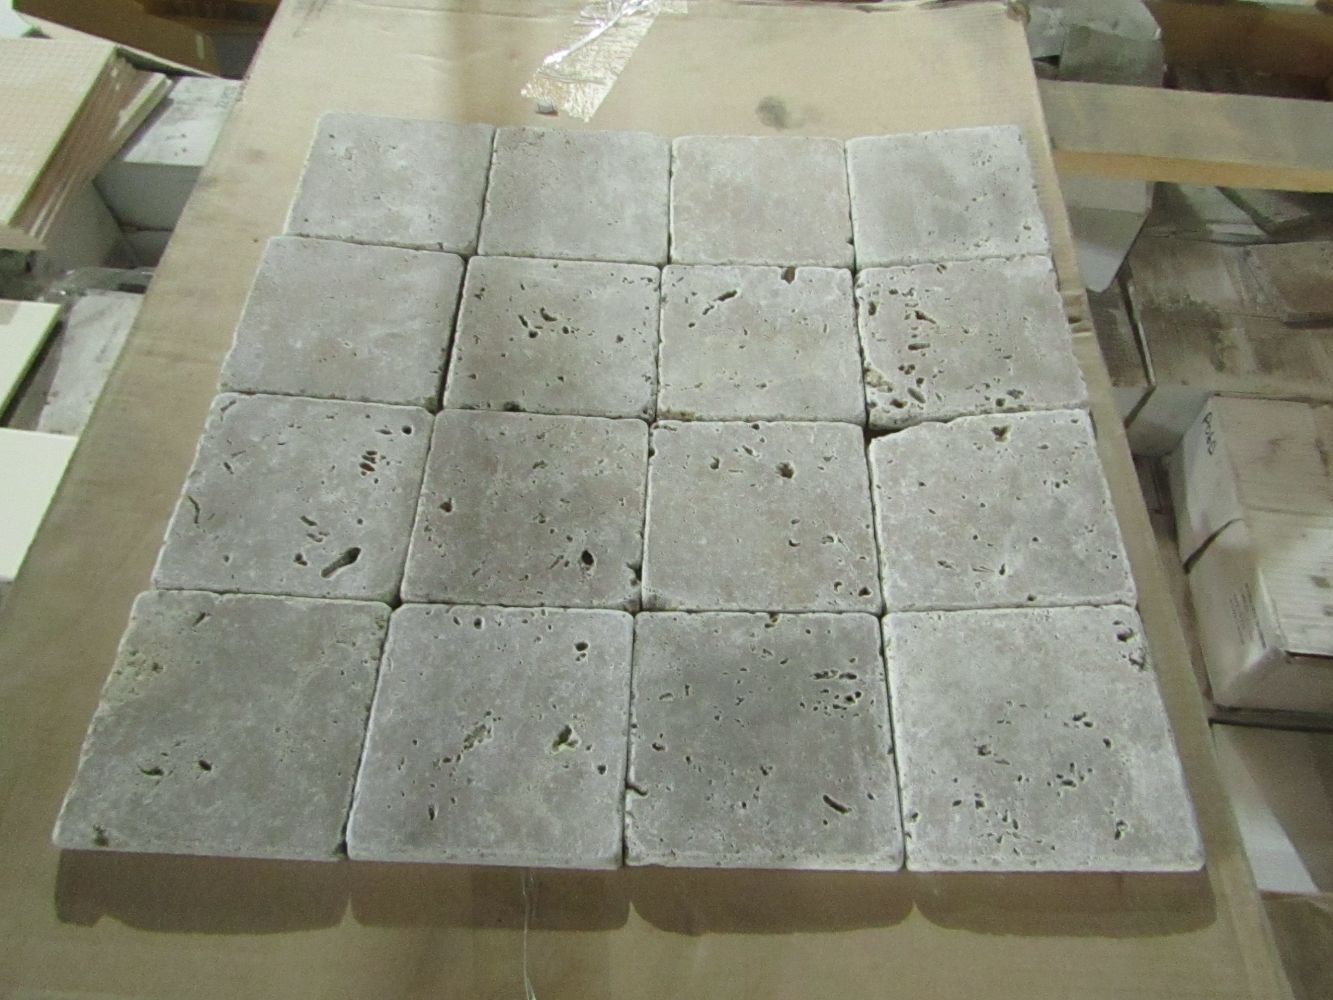 Tiles in Small Bulk Lots and Pallets